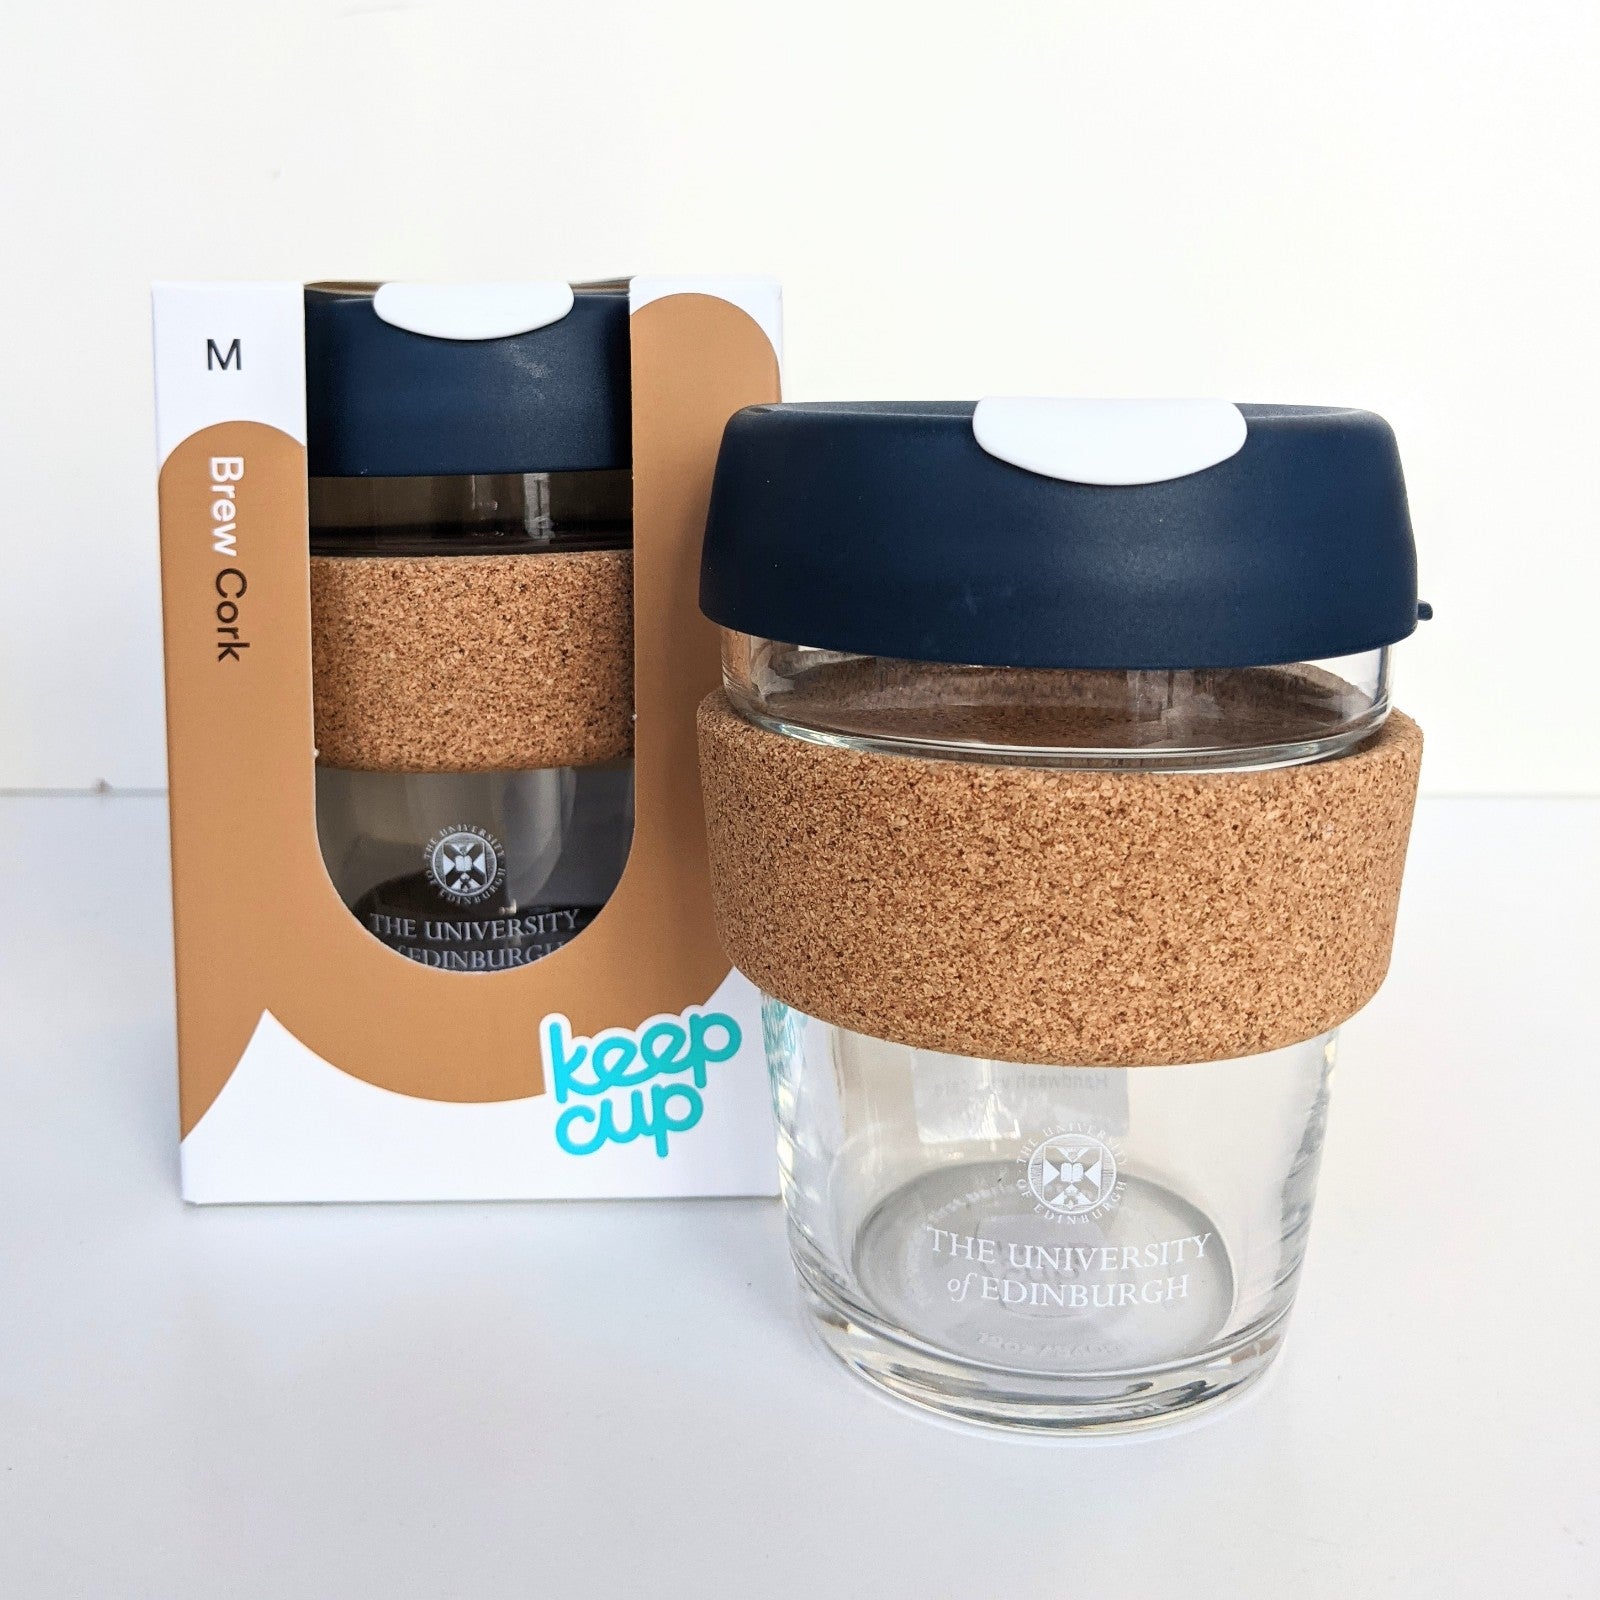 Glass Keep Cup with cork grip and navy blue and white lid displayed beside the same product in its packaging. 